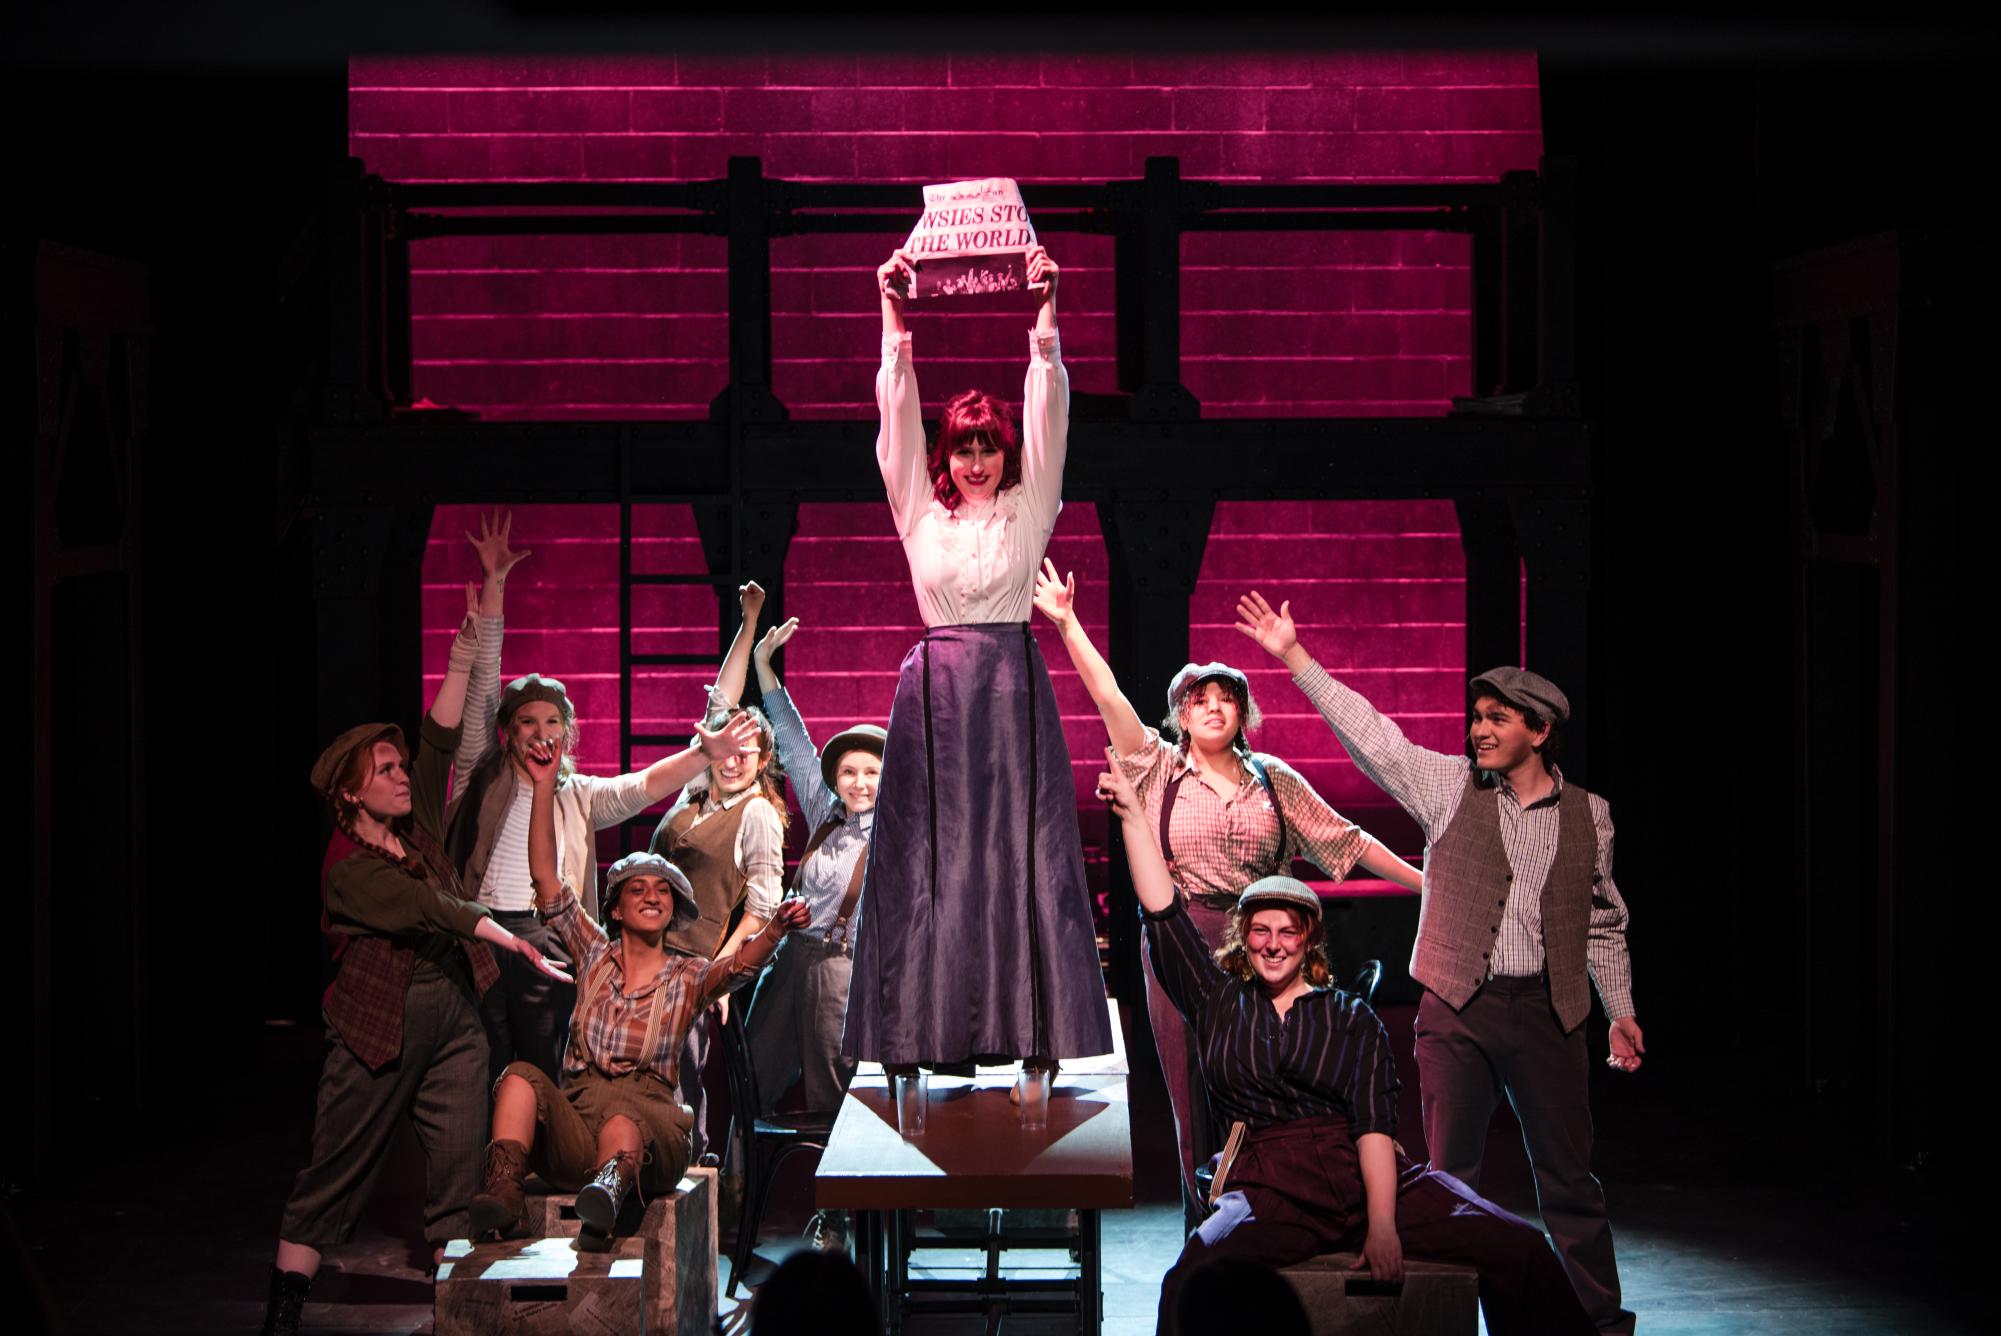 The cast of “Newsies” shines on stage during their production. 